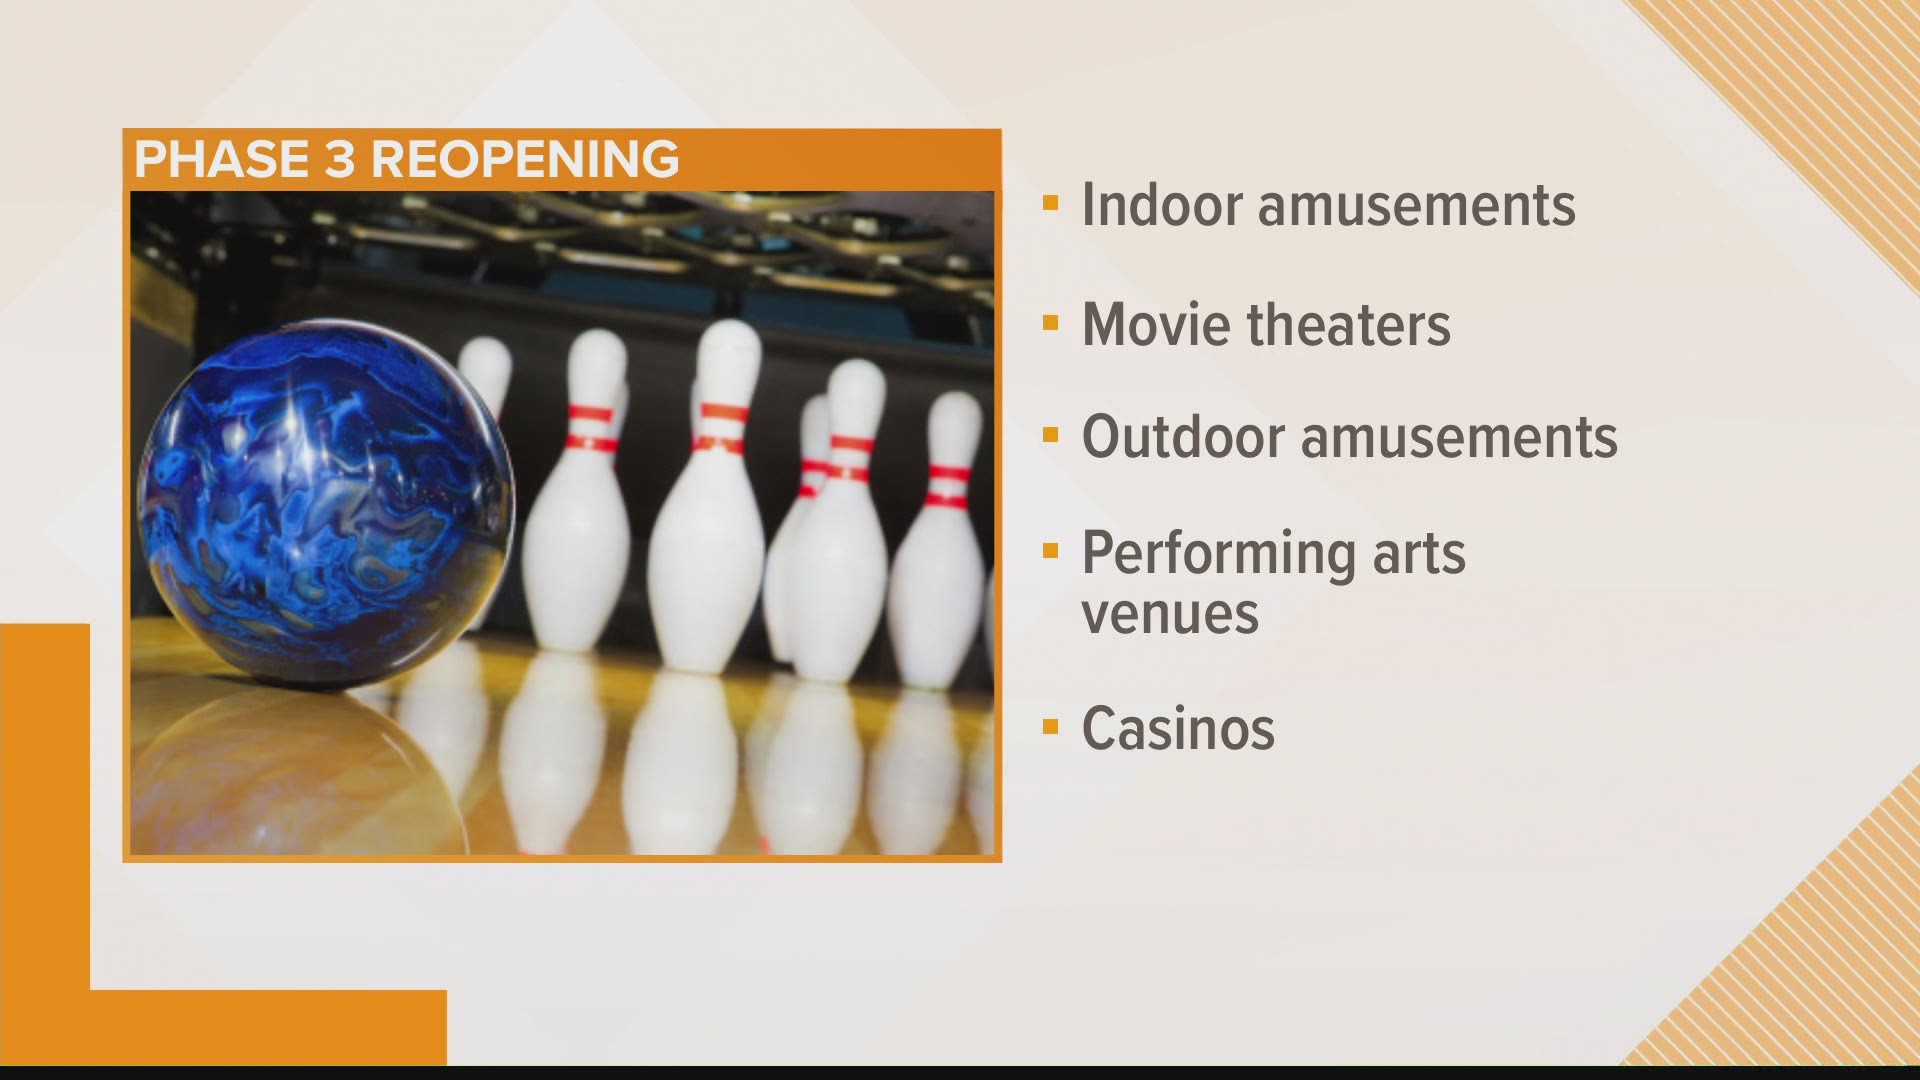 Maine's final phase of reopening begins. While there are still some restrictions, businesses like bowling alleys, movie theaters, and amusement parks can open.